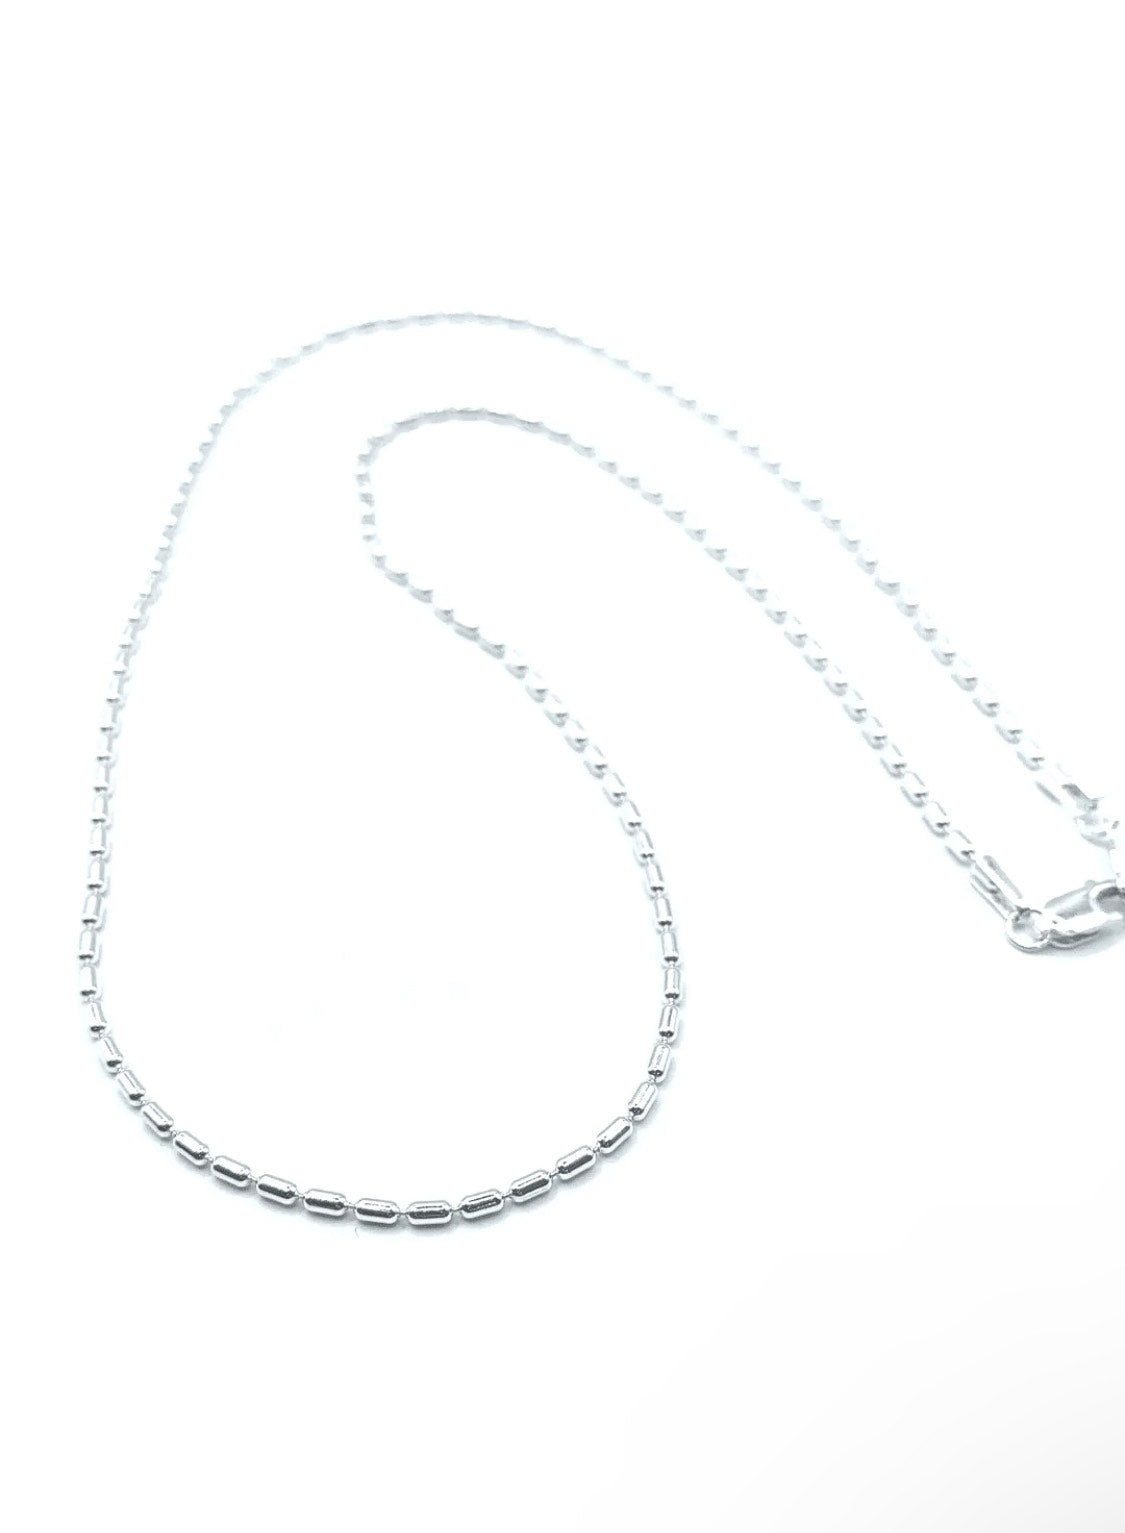 Erin Gray - Sterling Silver 17" Royal Necklace - Waterproof!